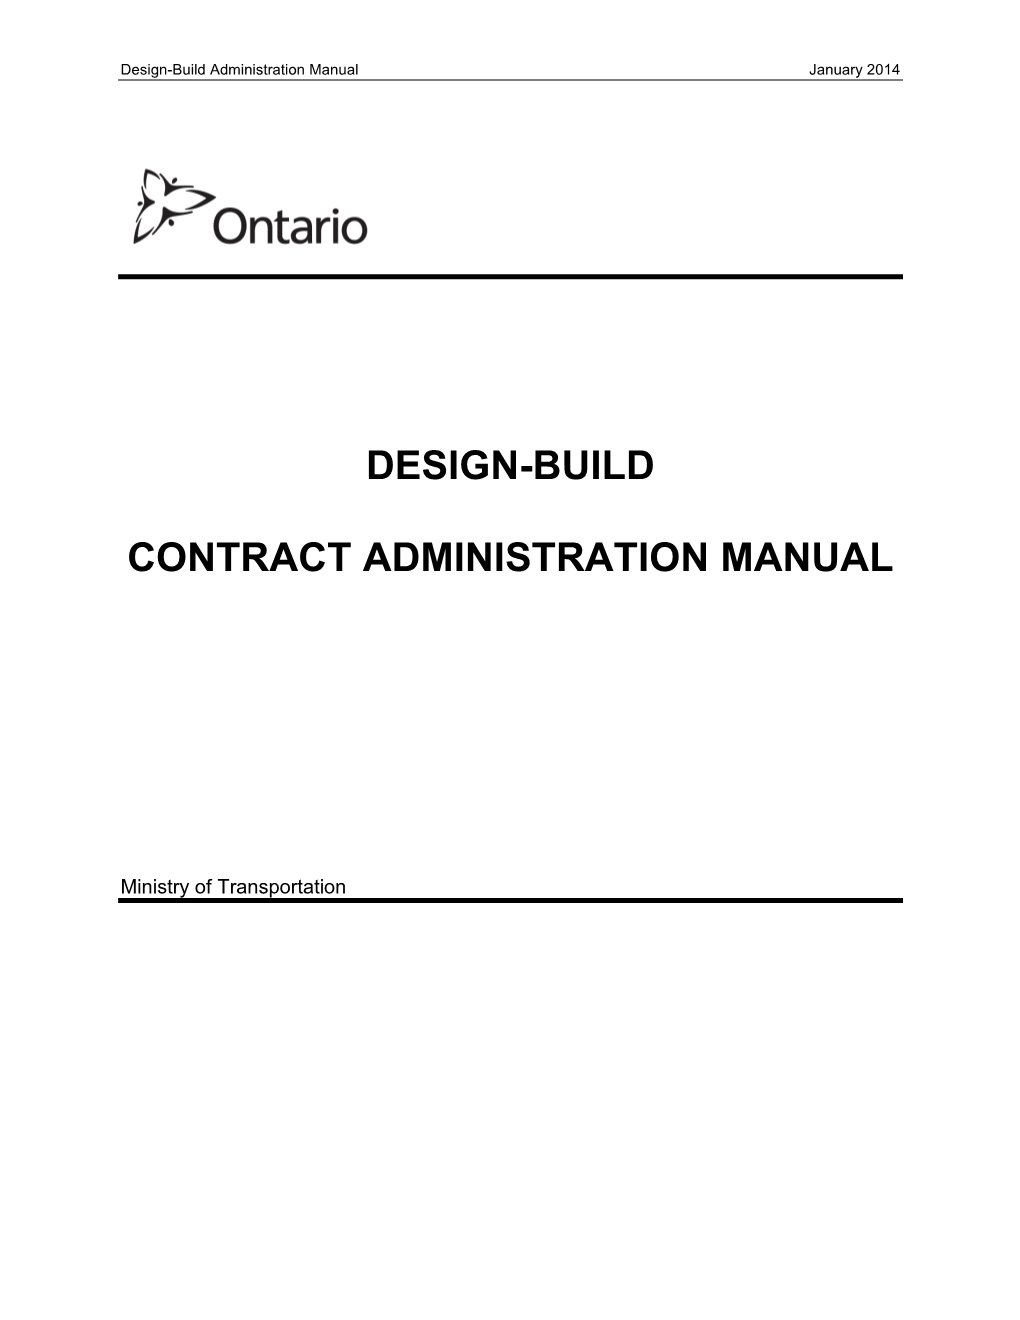 Design-Build Contract Administration Manual Requirements